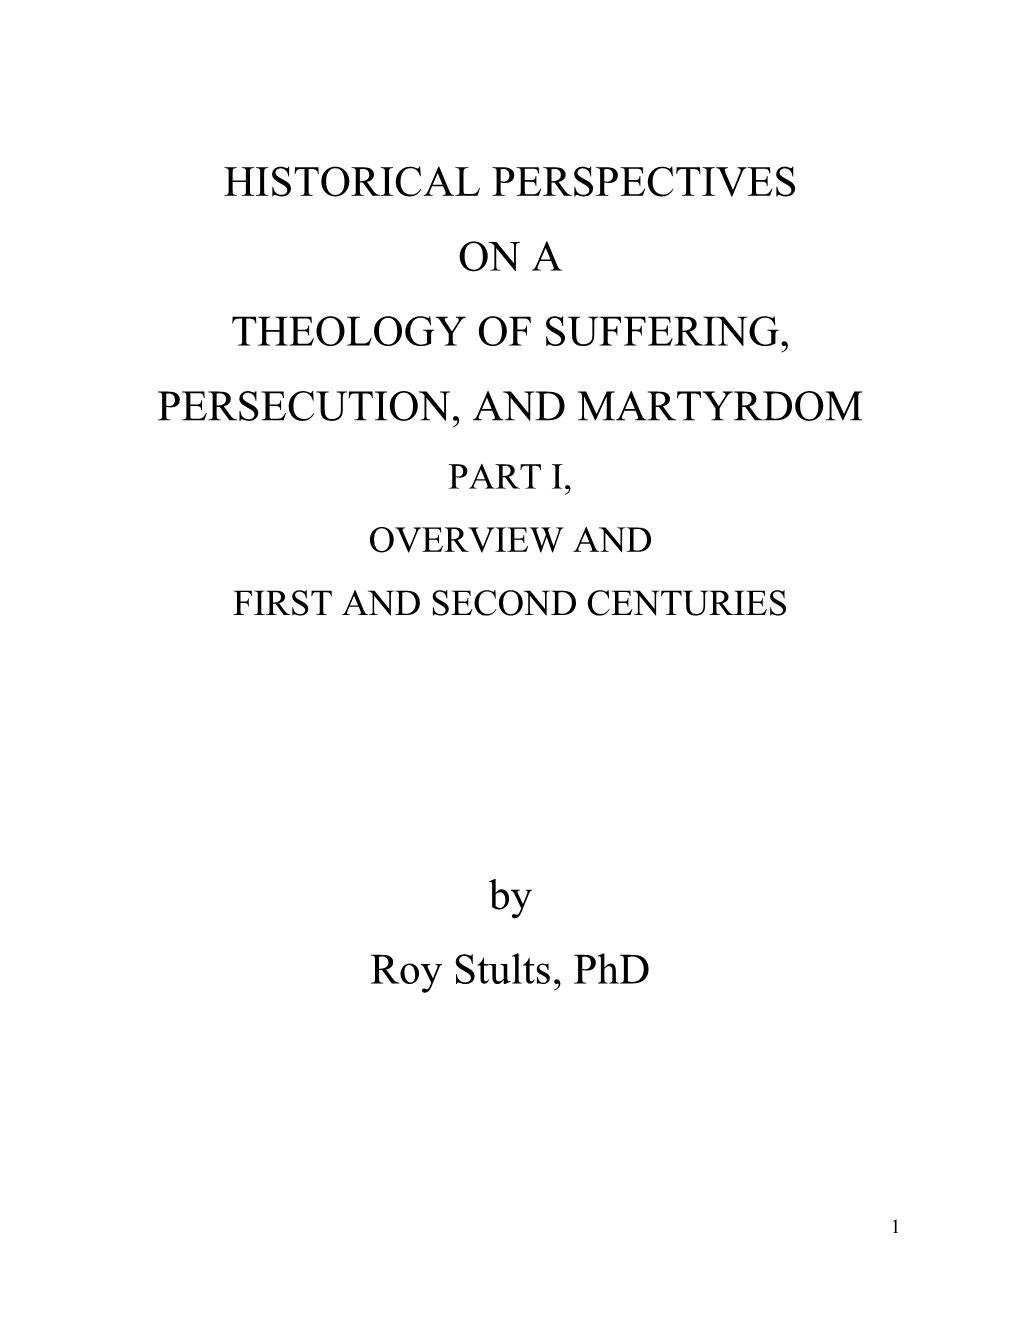 HISTORICAL PERSPECTIVES on a THEOLOGY of SUFFERING, PERSECUTION, and MARTYRDOM by Roy Stults